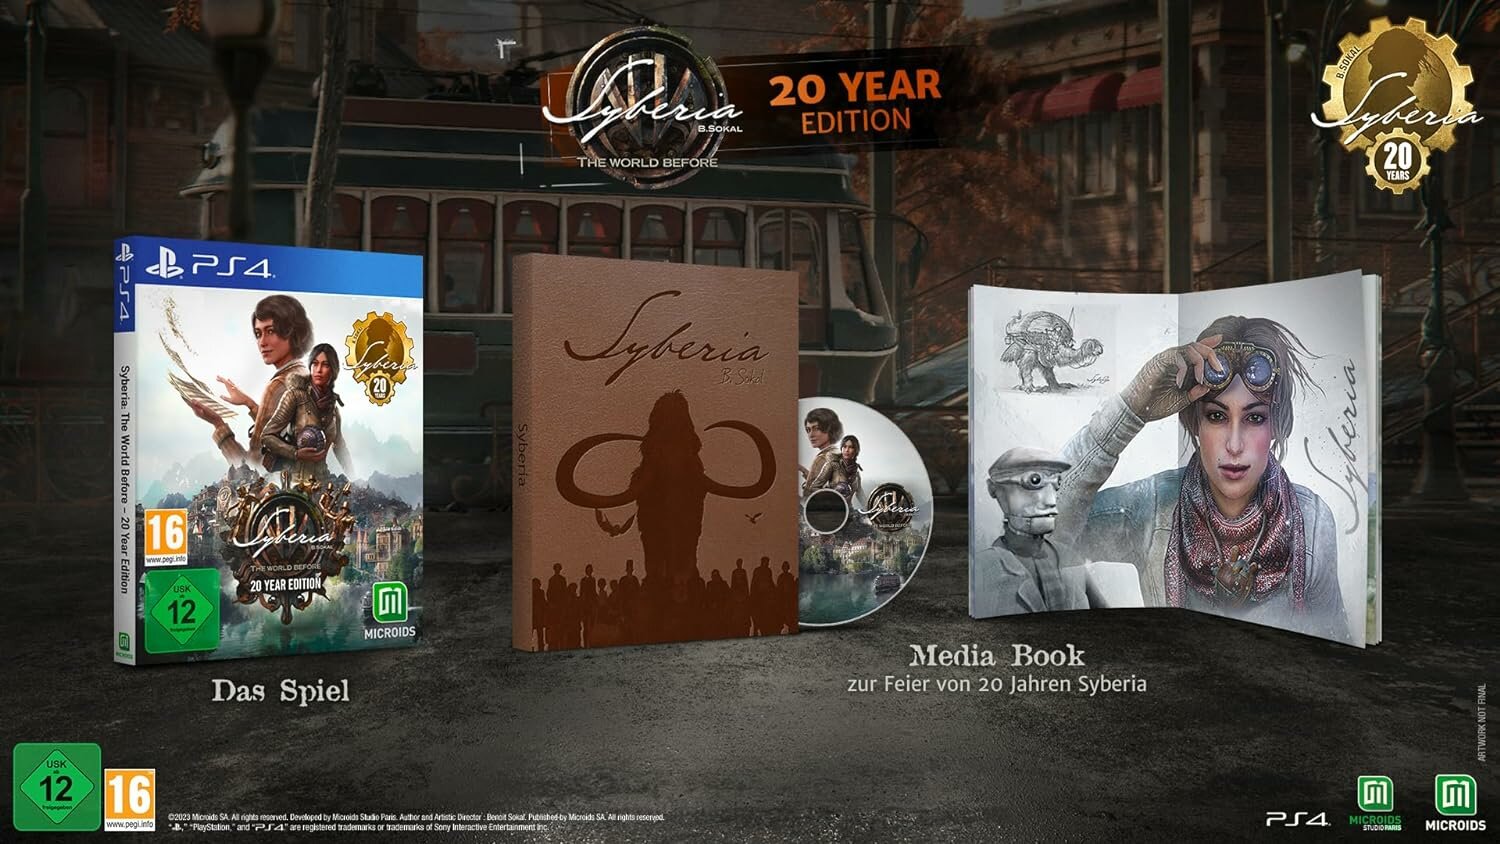 Syberia: The World Before 20 Year Edition (PS4 русская версия)